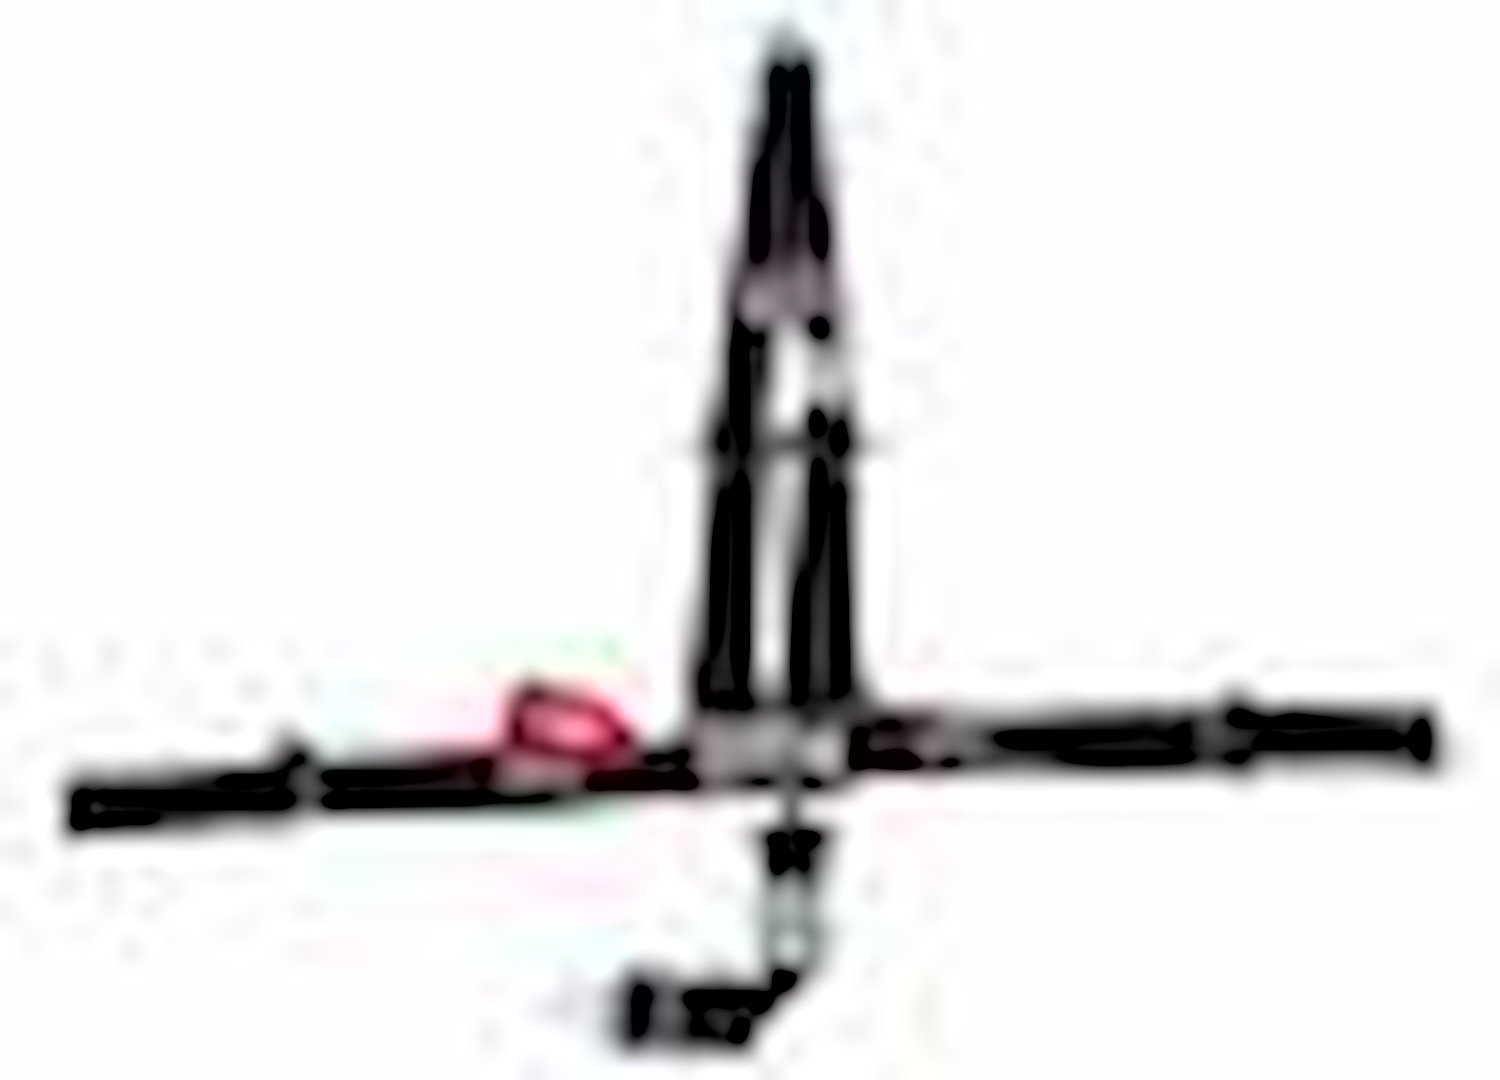 SFI 16.1 L&L HARNESS 2 PULL DOWN Lap Belt 2 Shoulder Harness Individual FLOOR Mount 2 DOUBLE Sub ALL WRAP ENDS HOT PINK